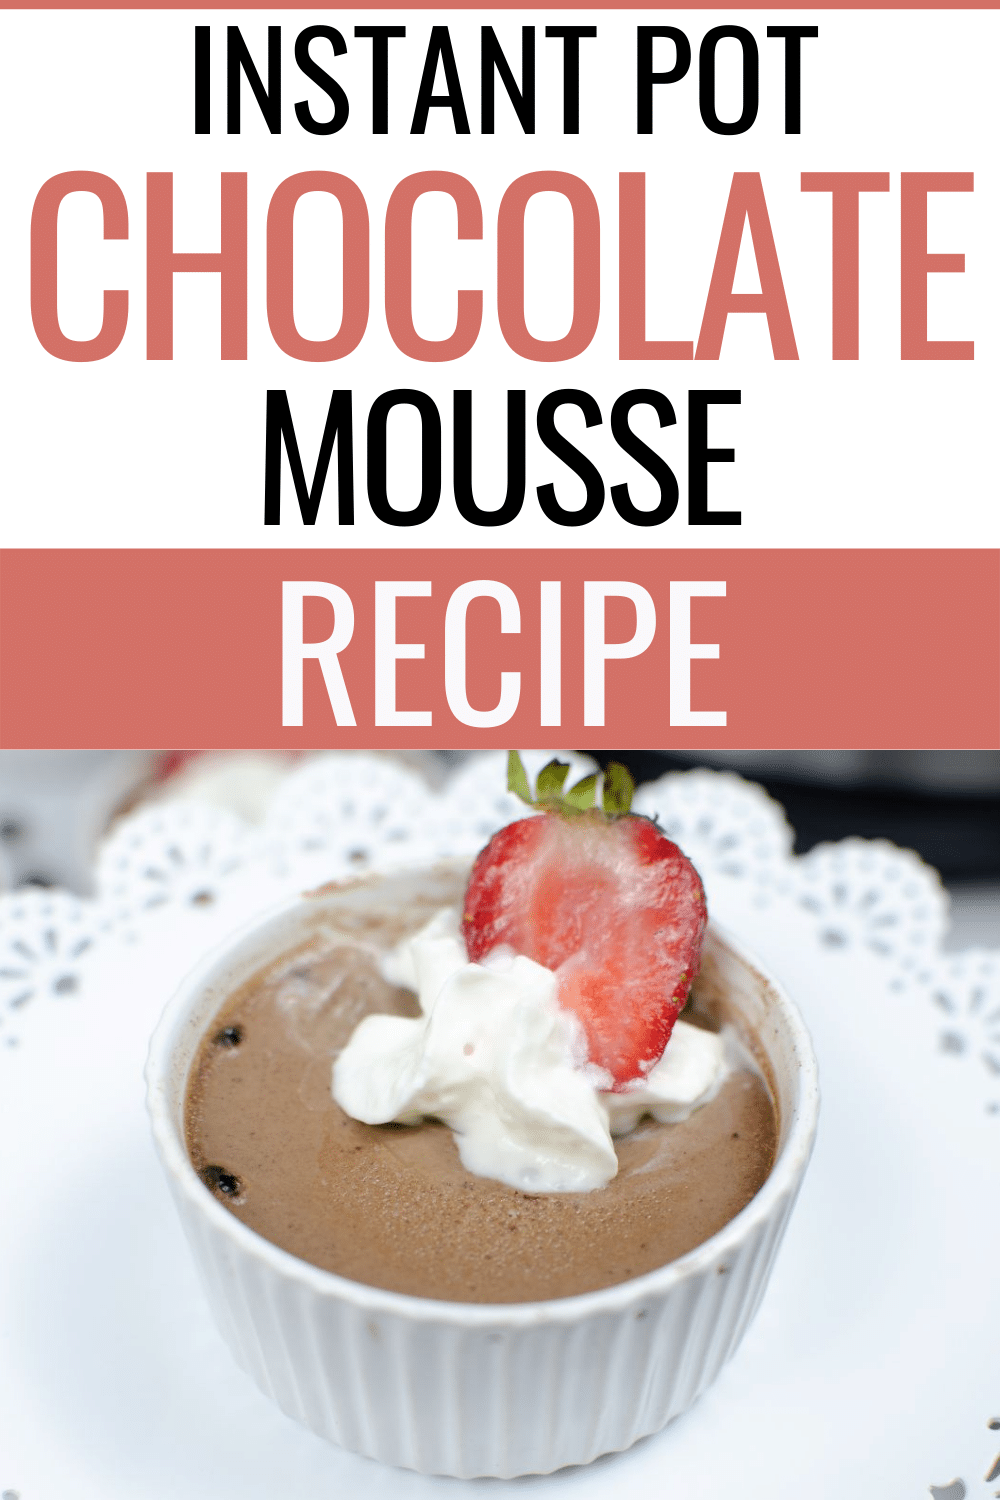 Instant Pot Chocolate Mousse is a creamy and rich mousse that can help you satisfy your chocolate cravings. It's also easy to make! #instantpot #pressurecooker #chocolatemousse #dessert #recipe via @wondermomwannab